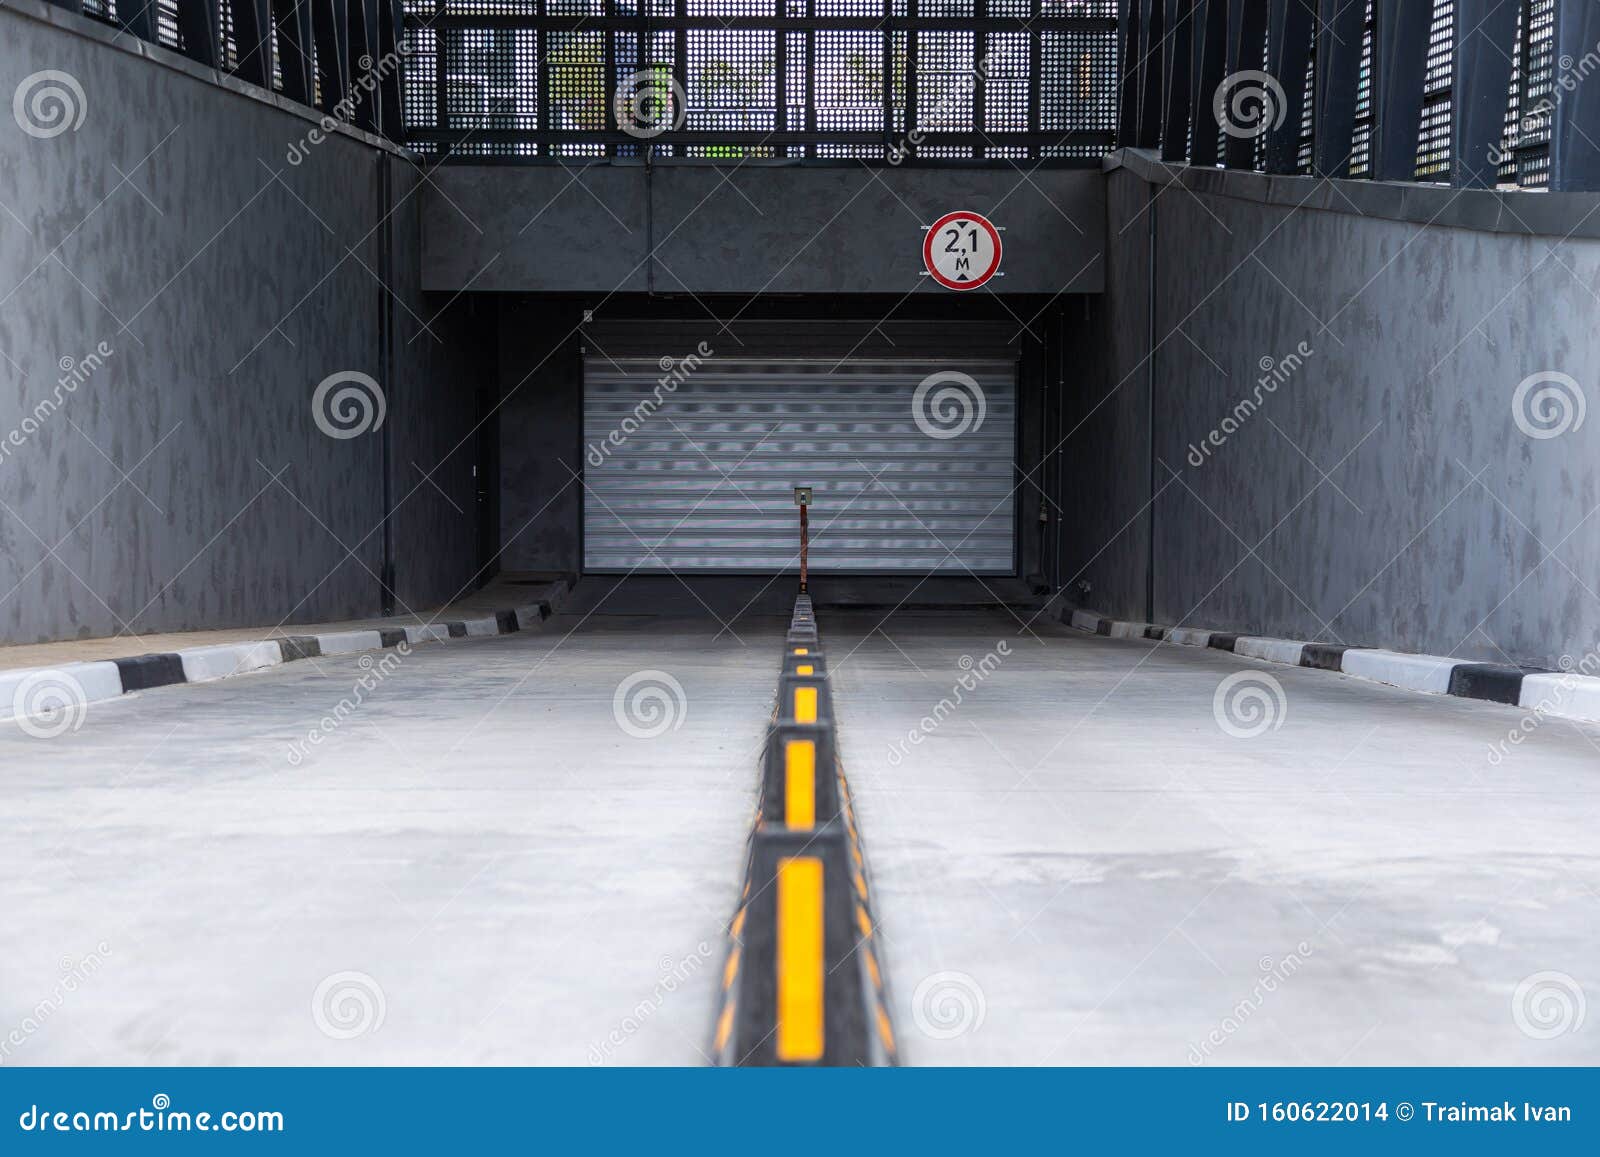 Entrance To Underground Parking Space with Roller-shutter Door and Road ...